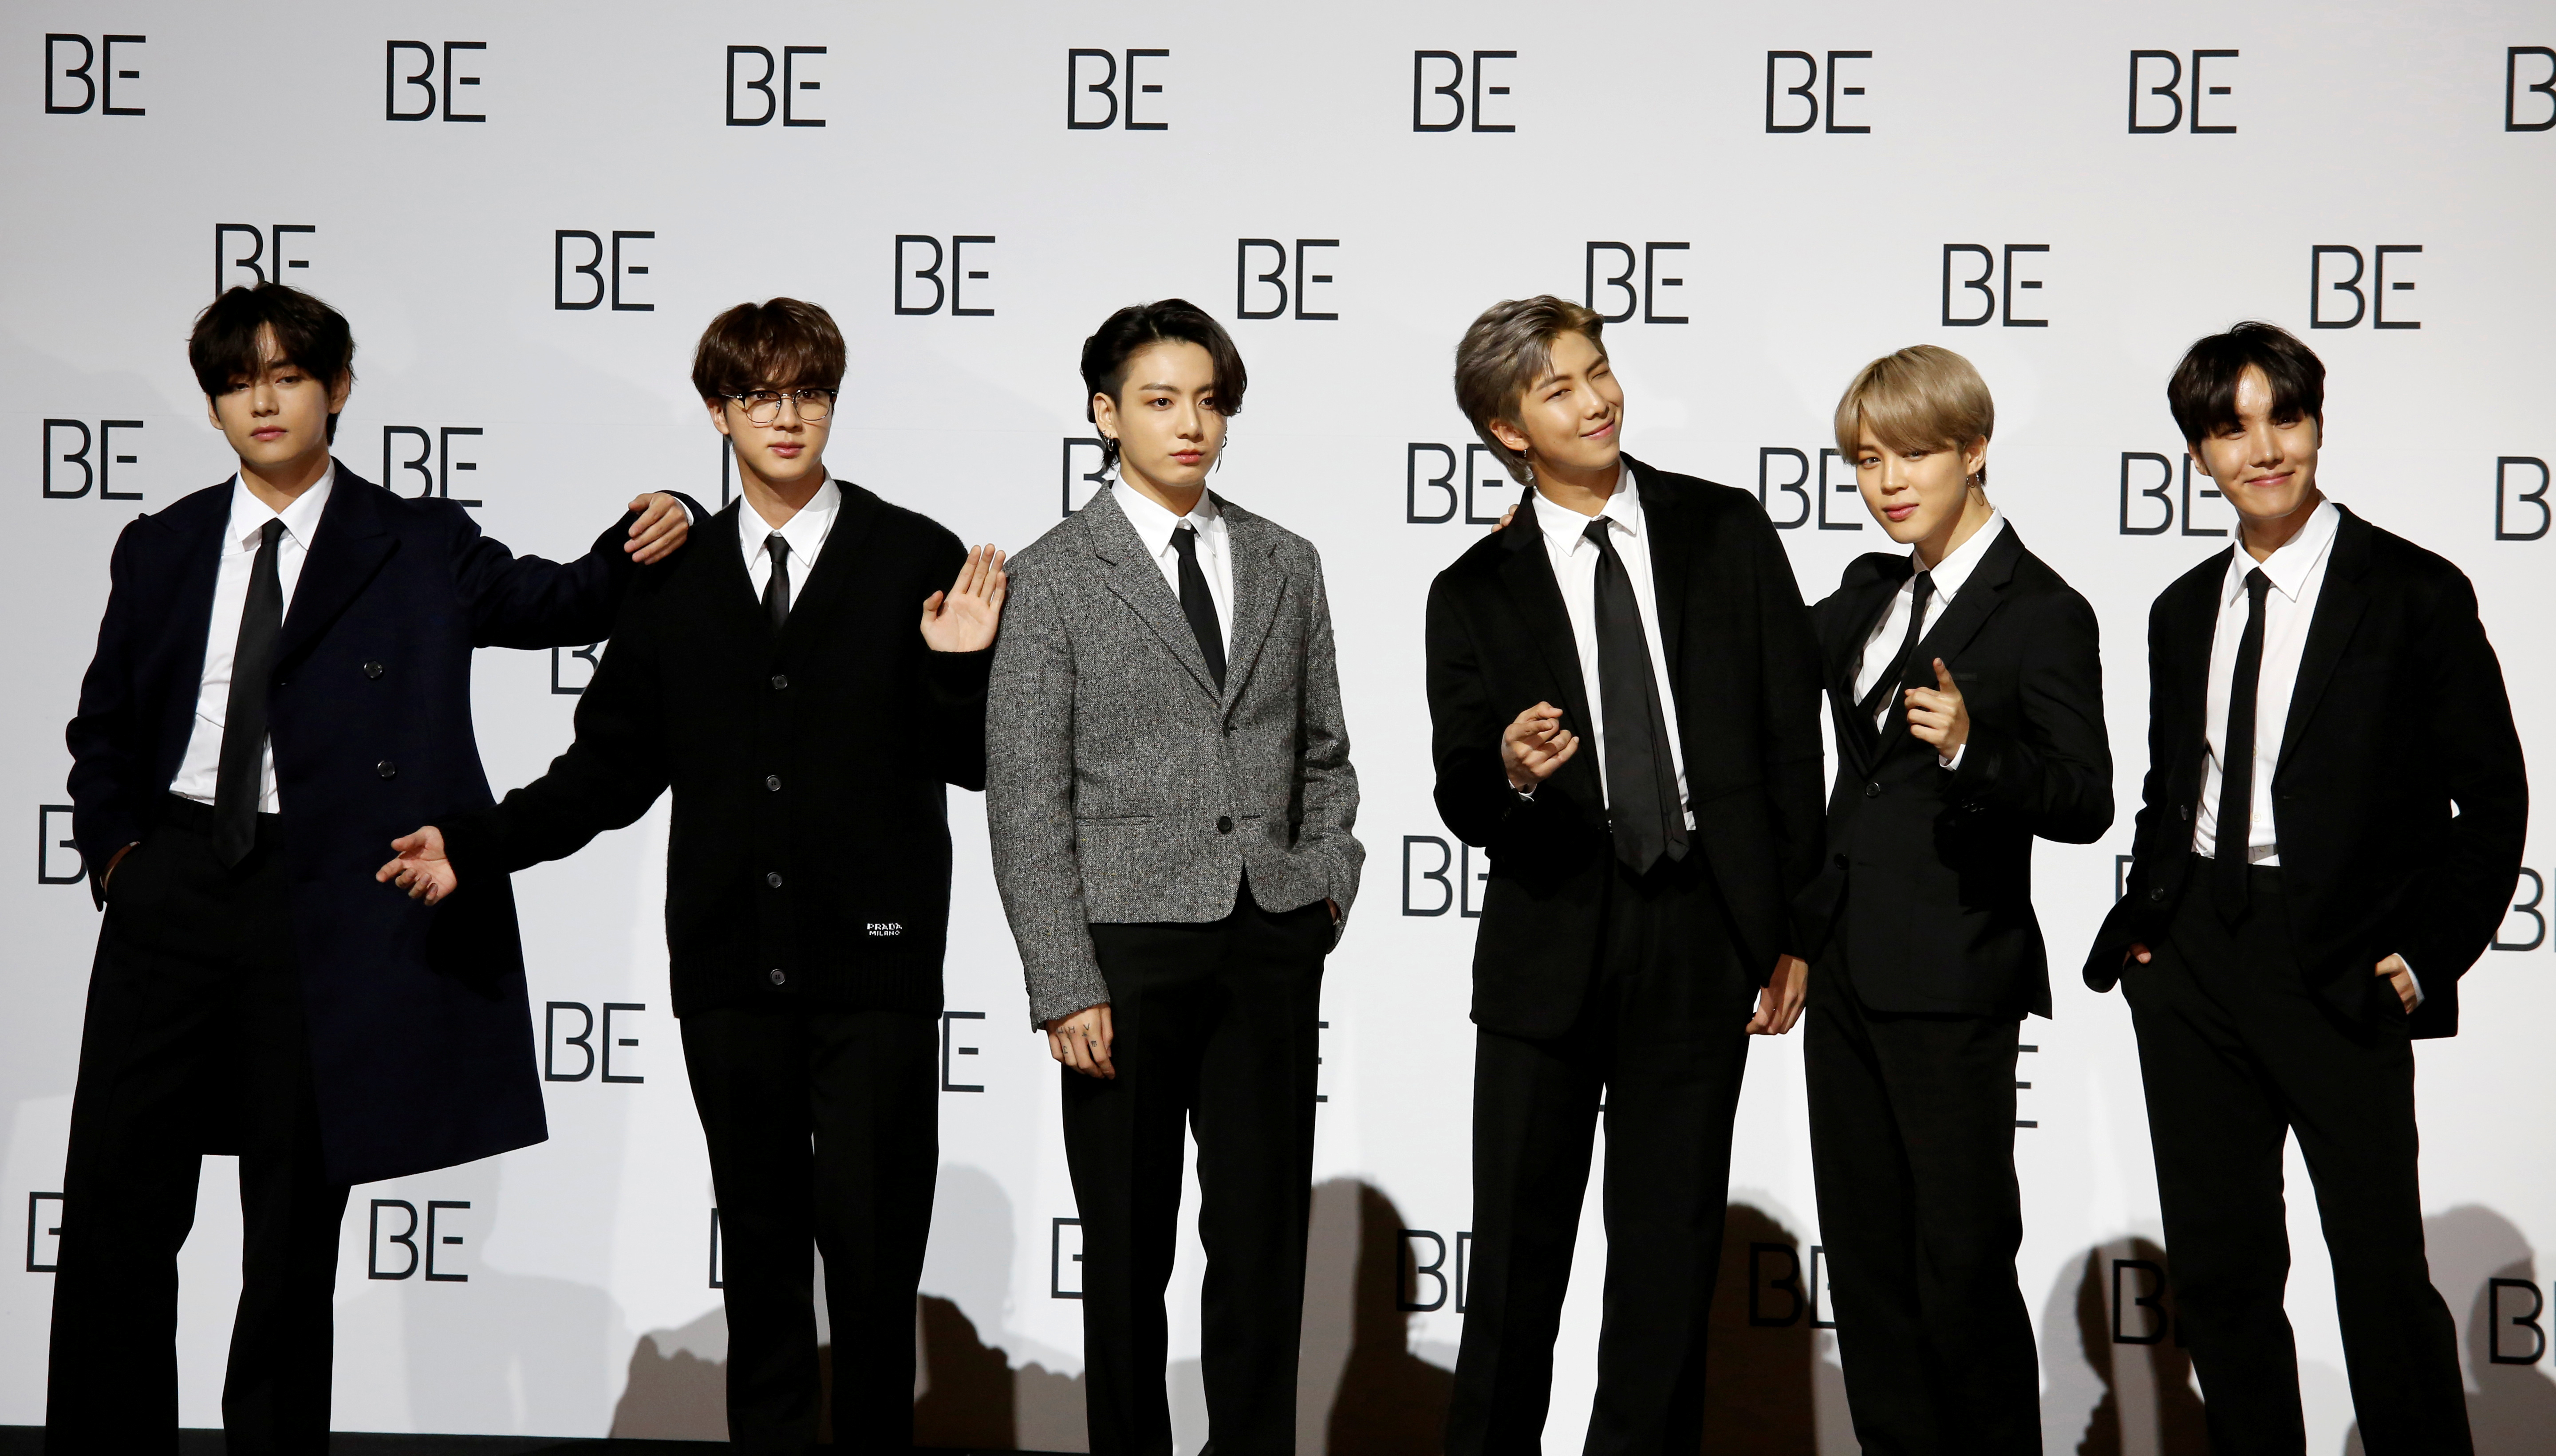 Members of K-pop boy band BTS pose for photographs during a news conference promoting their new album 